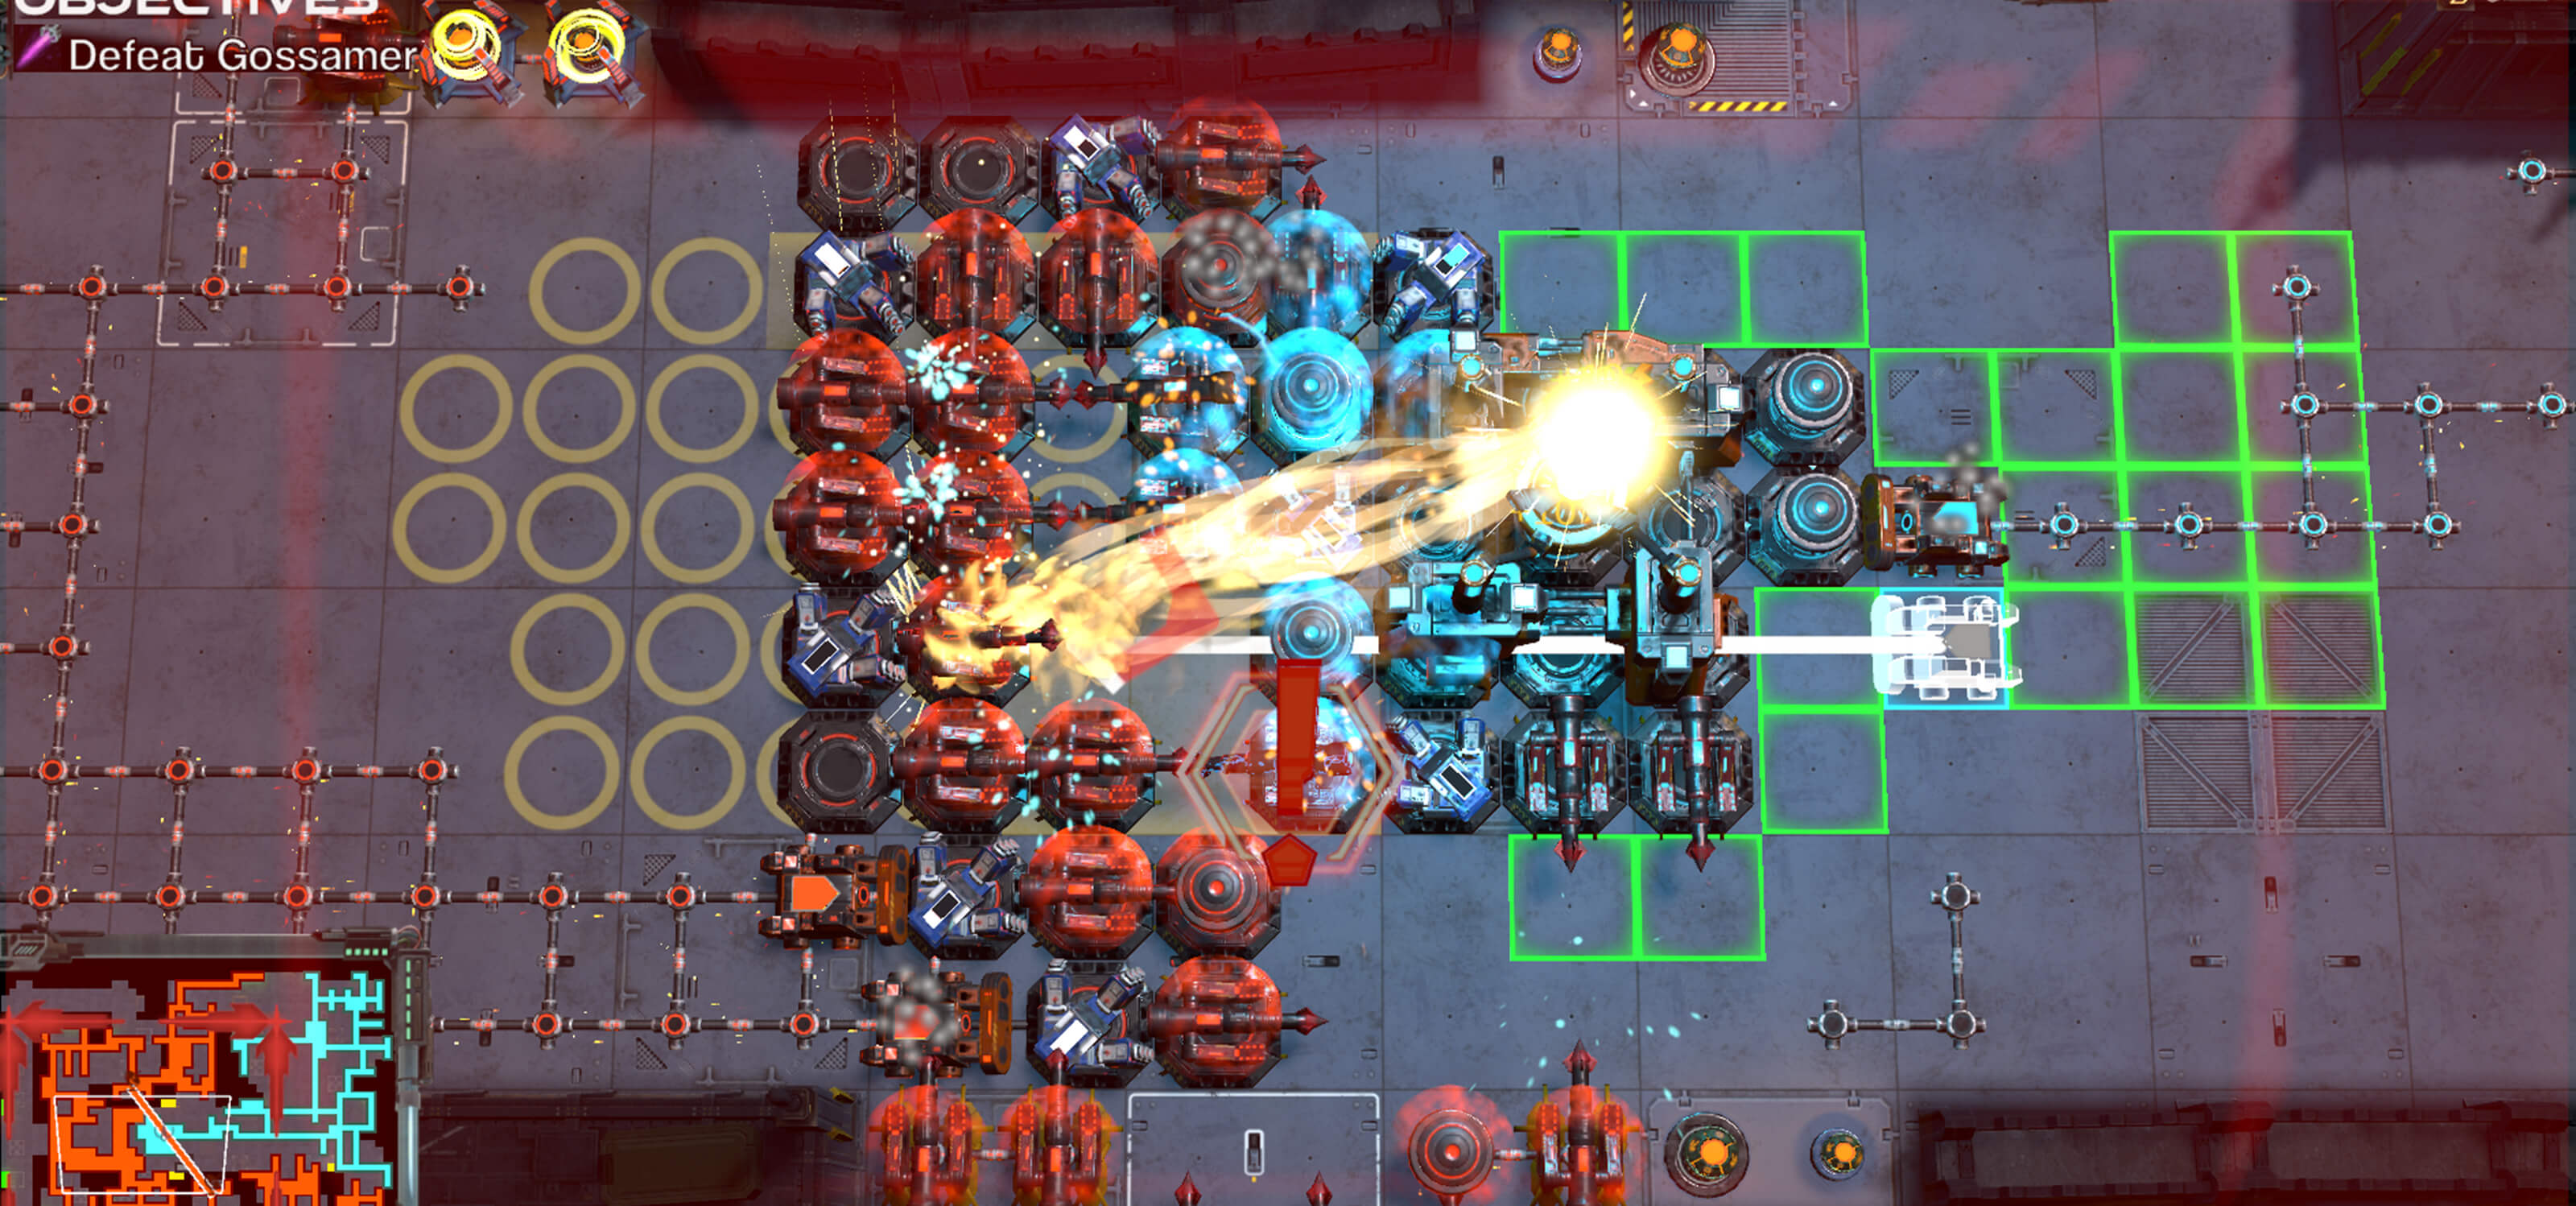 A blue sci-fi structure fires a beam at opposing red buildings in the game Byte Lynx.